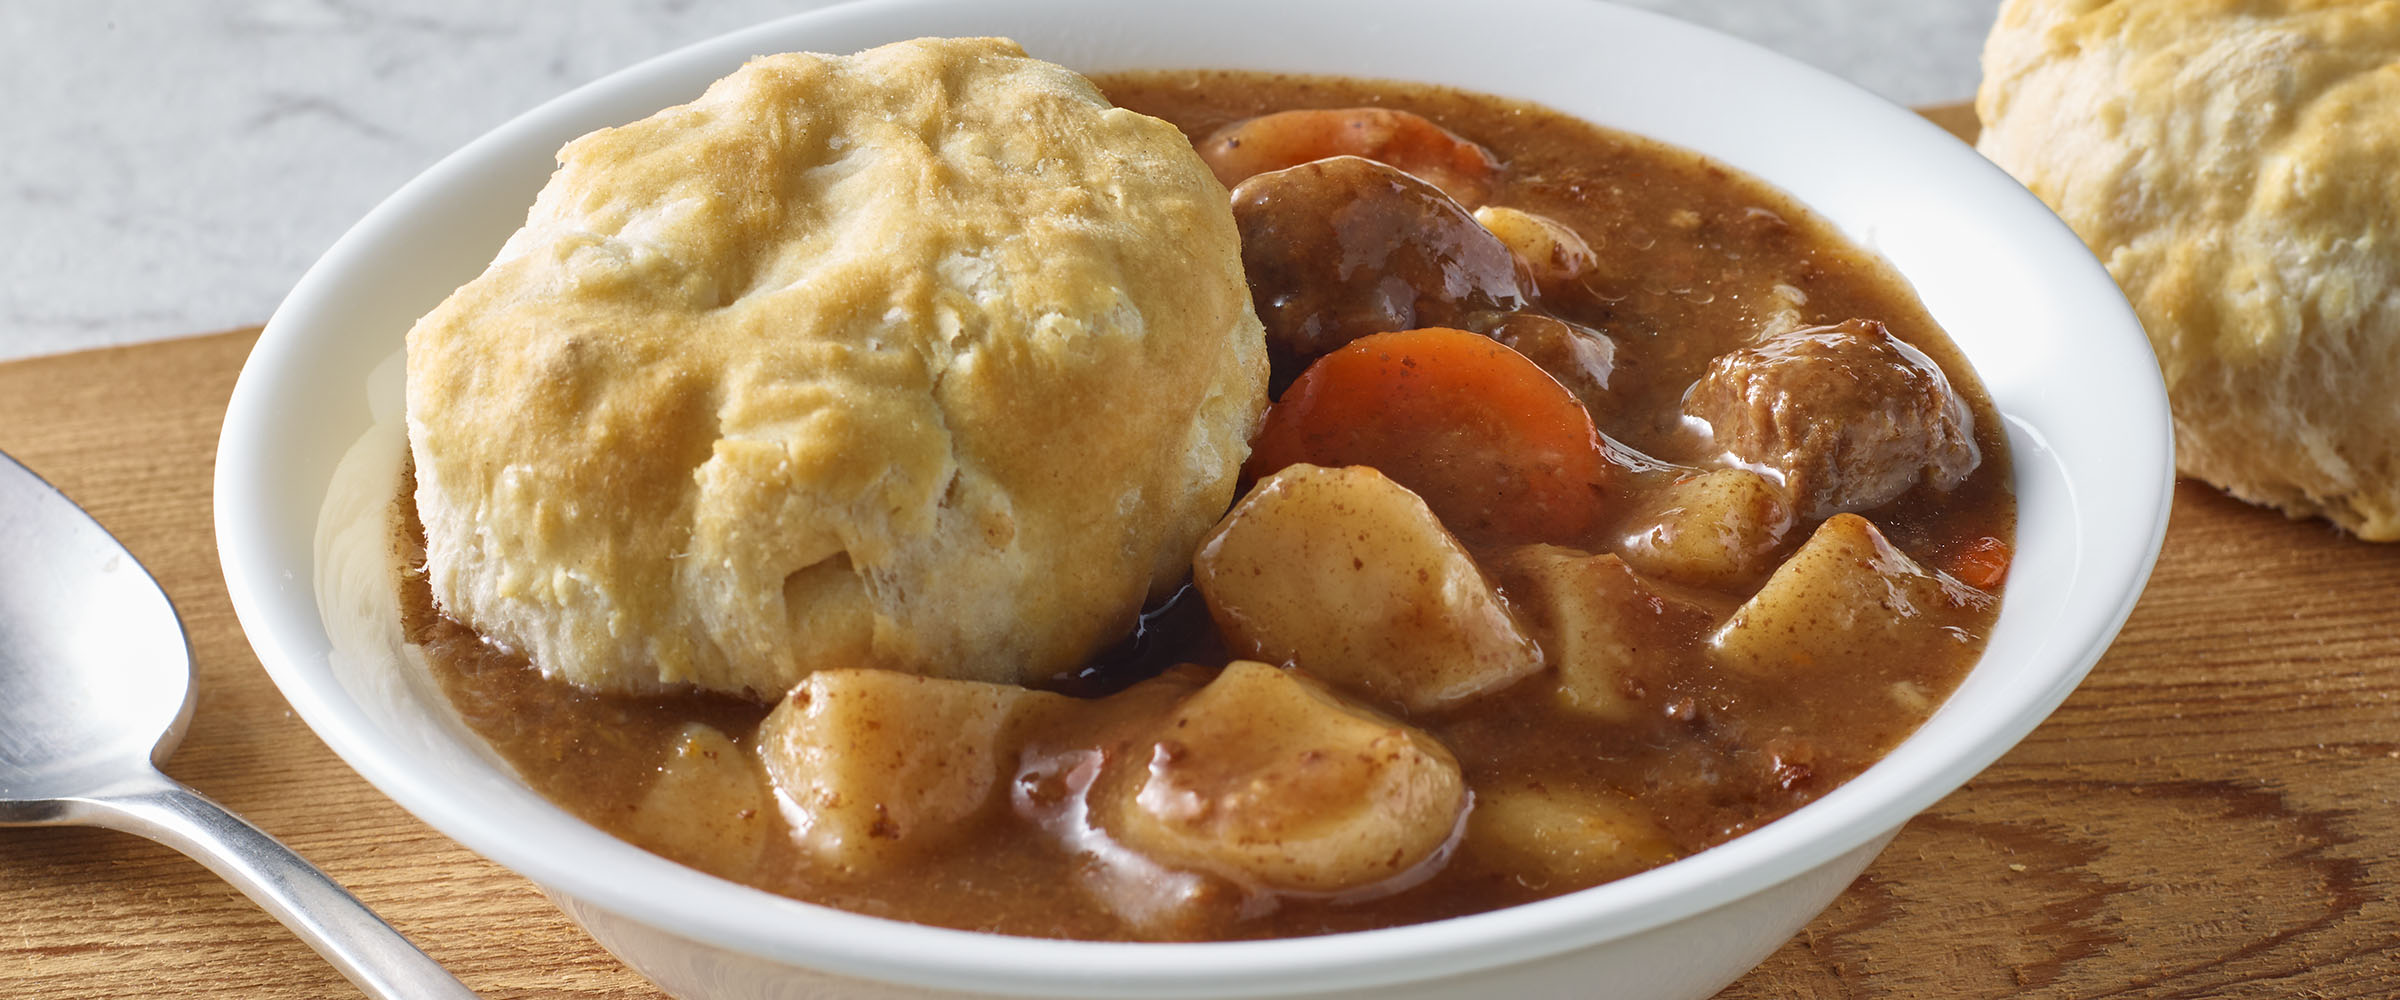 Air Fryer Beef Stew and Biscuits